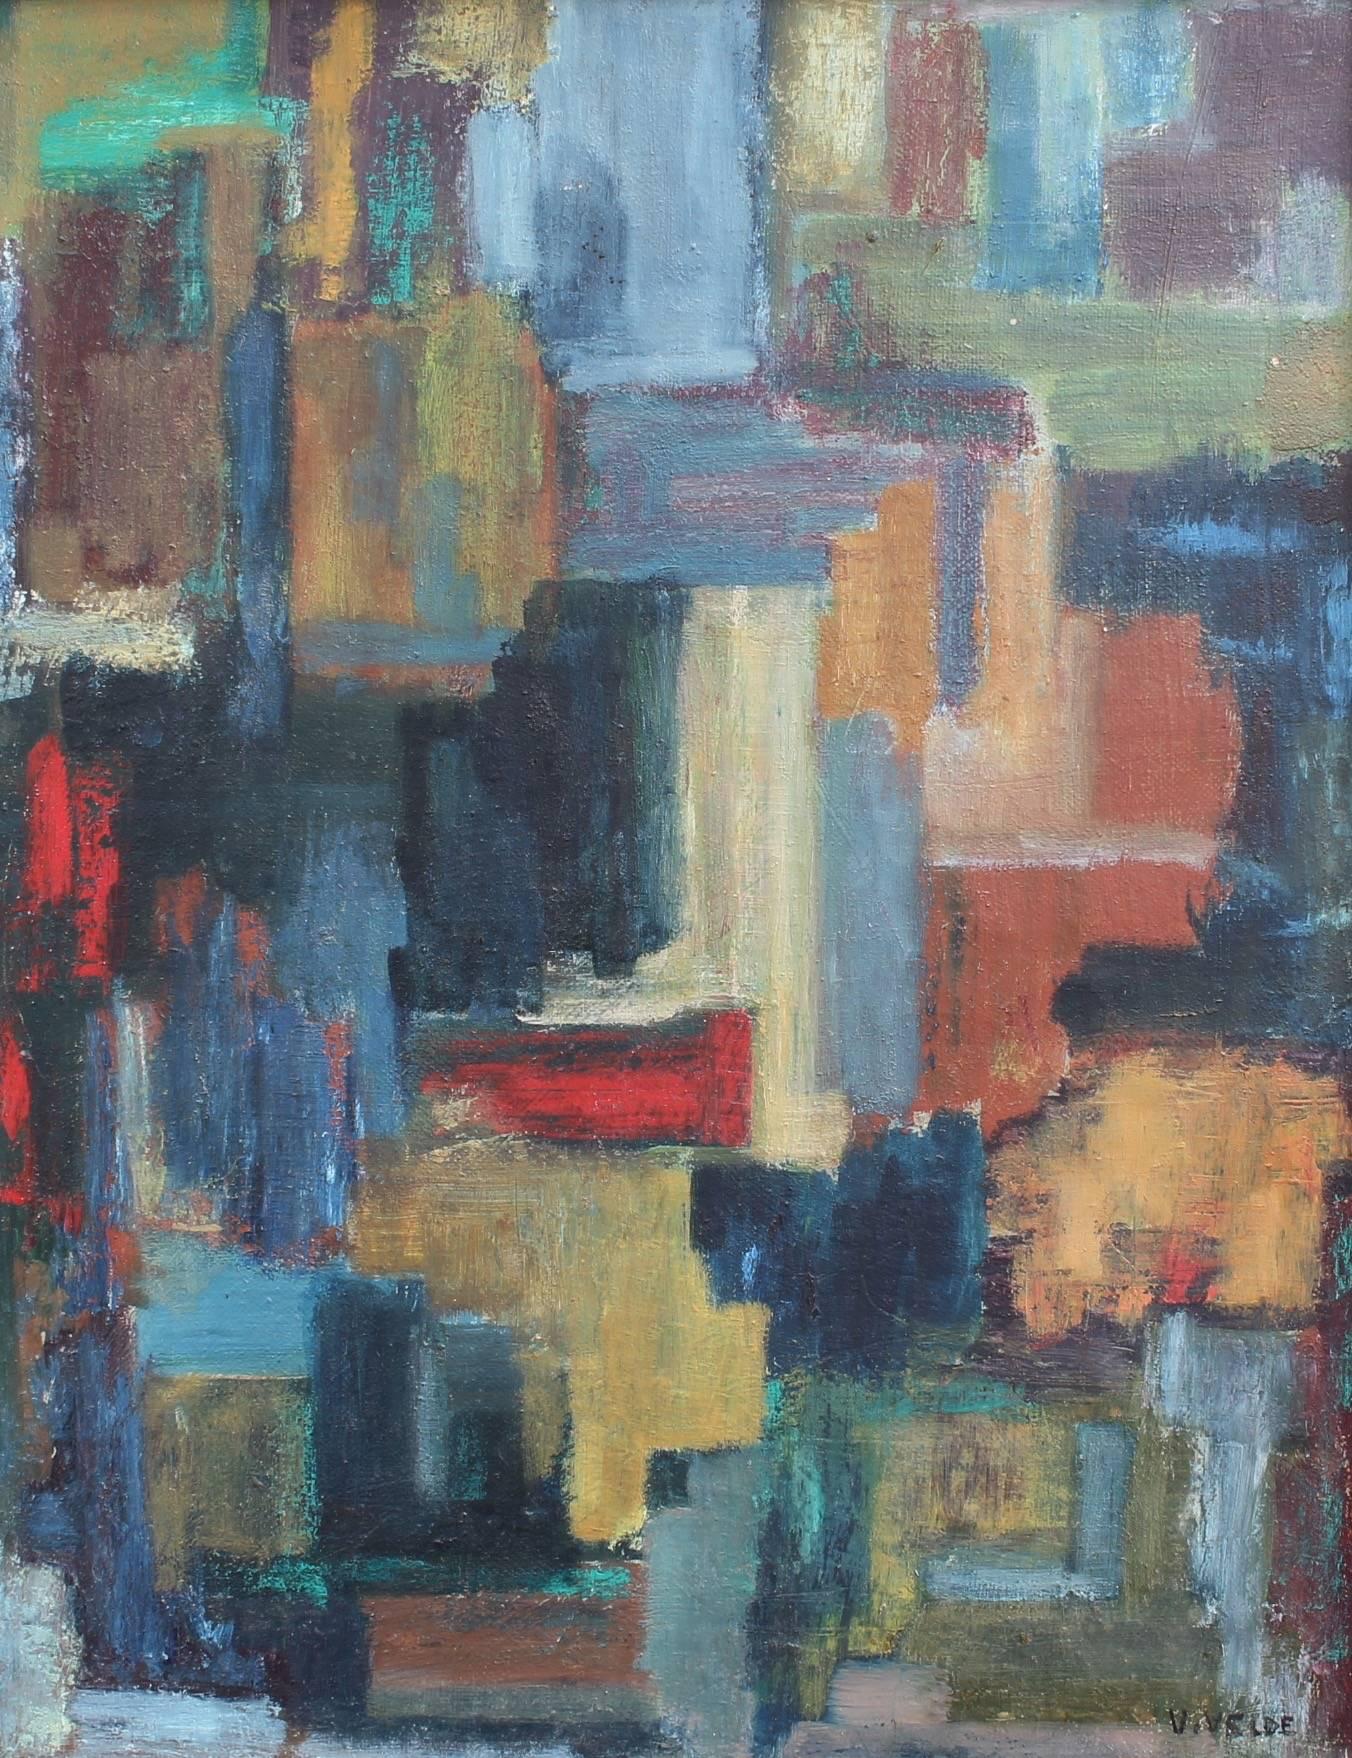 'Composition Classique', oil on canvas (1962), by V. Velde. Discovered in the south of France, this is an inspiring abstract artwork which makes an immediate impact on the viewer. The shapes appear as sculptures on the canvas. The colours evoke